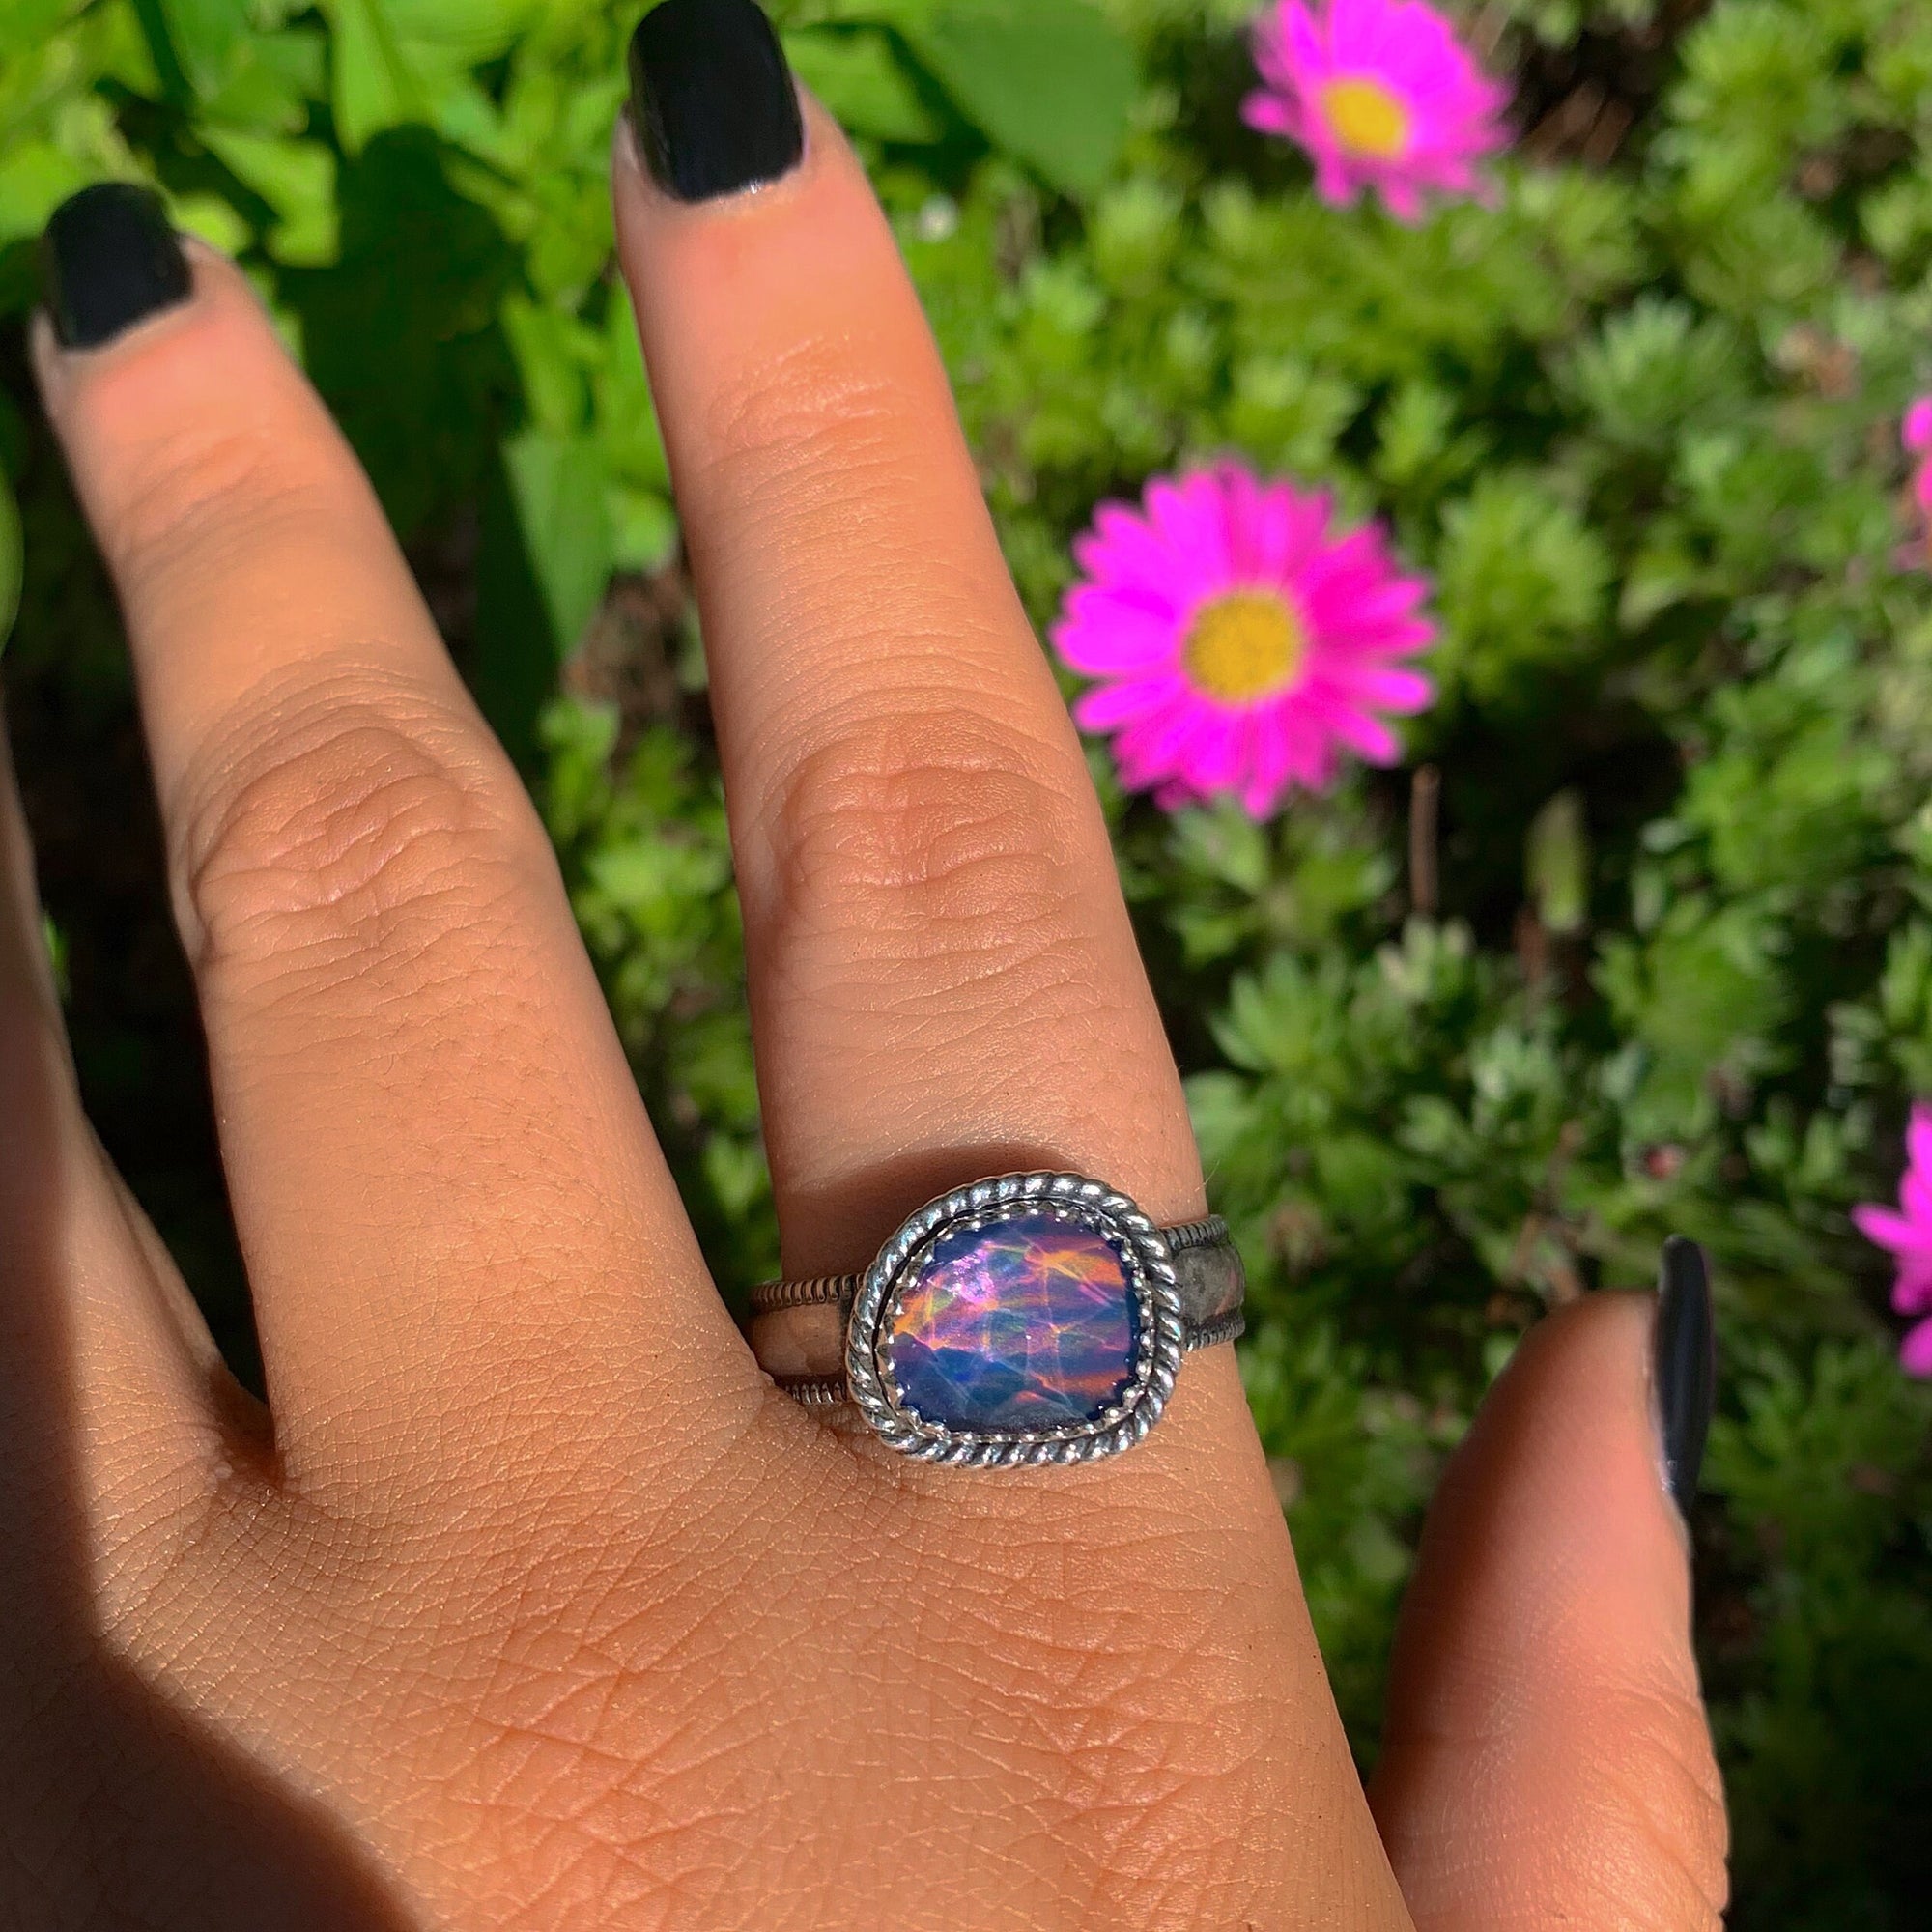 Rose Cut Clear Quartz & Aurora Opal Ring - Size 11 3/4 - Sterling Silver - Rainbow Opal Jewelry -Thick Ring Band - Faceted Rainbow Crystal